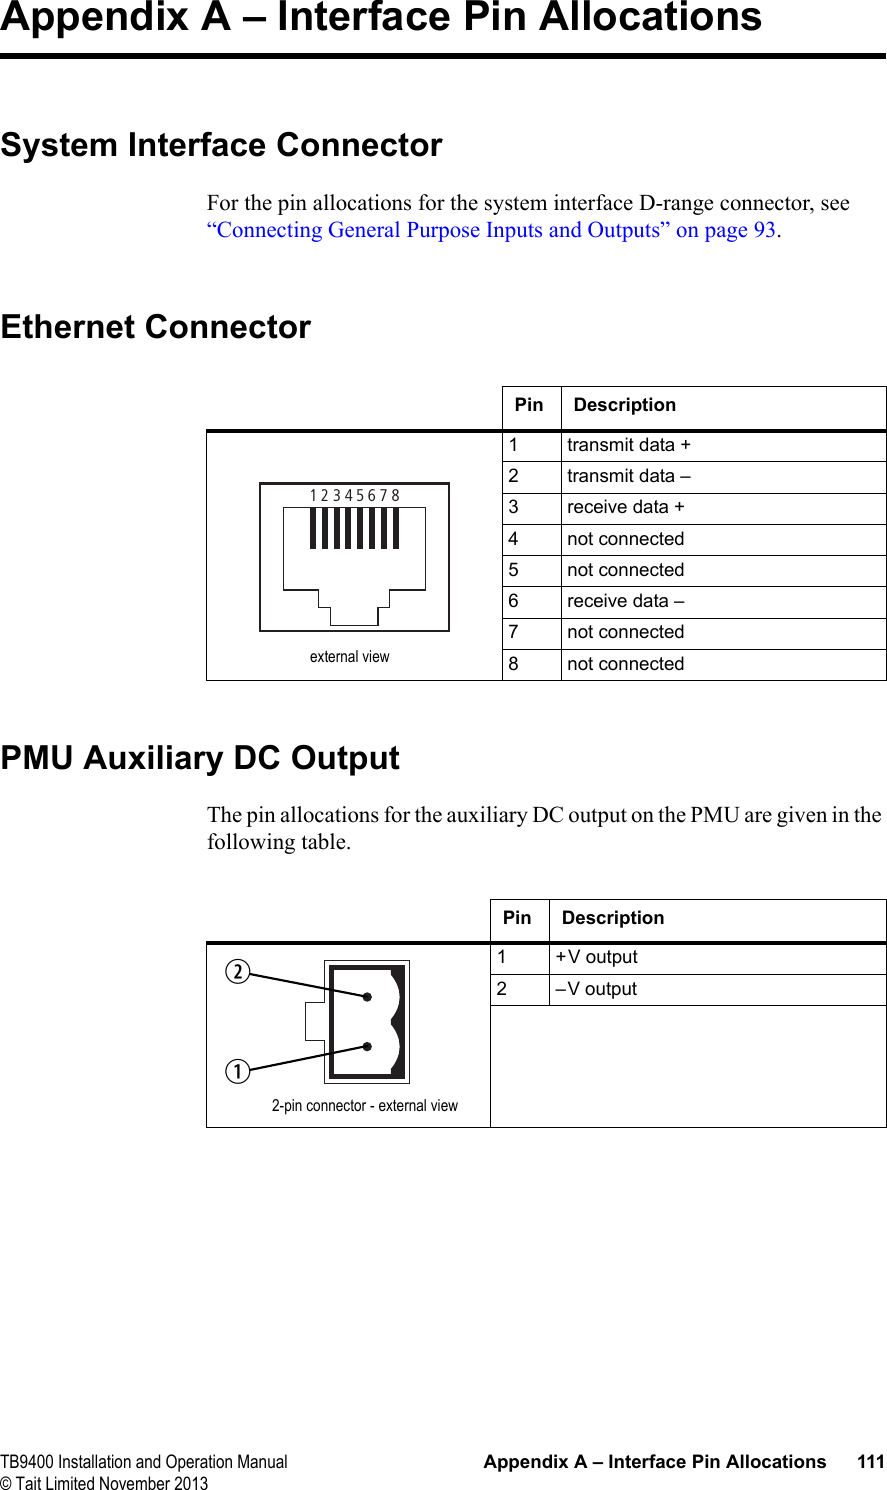  TB9400 Installation and Operation Manual Appendix A – Interface Pin Allocations 111© Tait Limited November 2013Appendix A – Interface Pin AllocationsSystem Interface ConnectorFor the pin allocations for the system interface D-range connector, see “Connecting General Purpose Inputs and Outputs” on page 93.Ethernet ConnectorPMU Auxiliary DC OutputThe pin allocations for the auxiliary DC output on the PMU are given in the following table.Pin Description1 transmit data +2 transmit data –3 receive data +4 not connected5 not connected6 receive data –7 not connected8 not connected12345678external viewPin Description1 +V output2 –V output2-pin connector - external viewbc